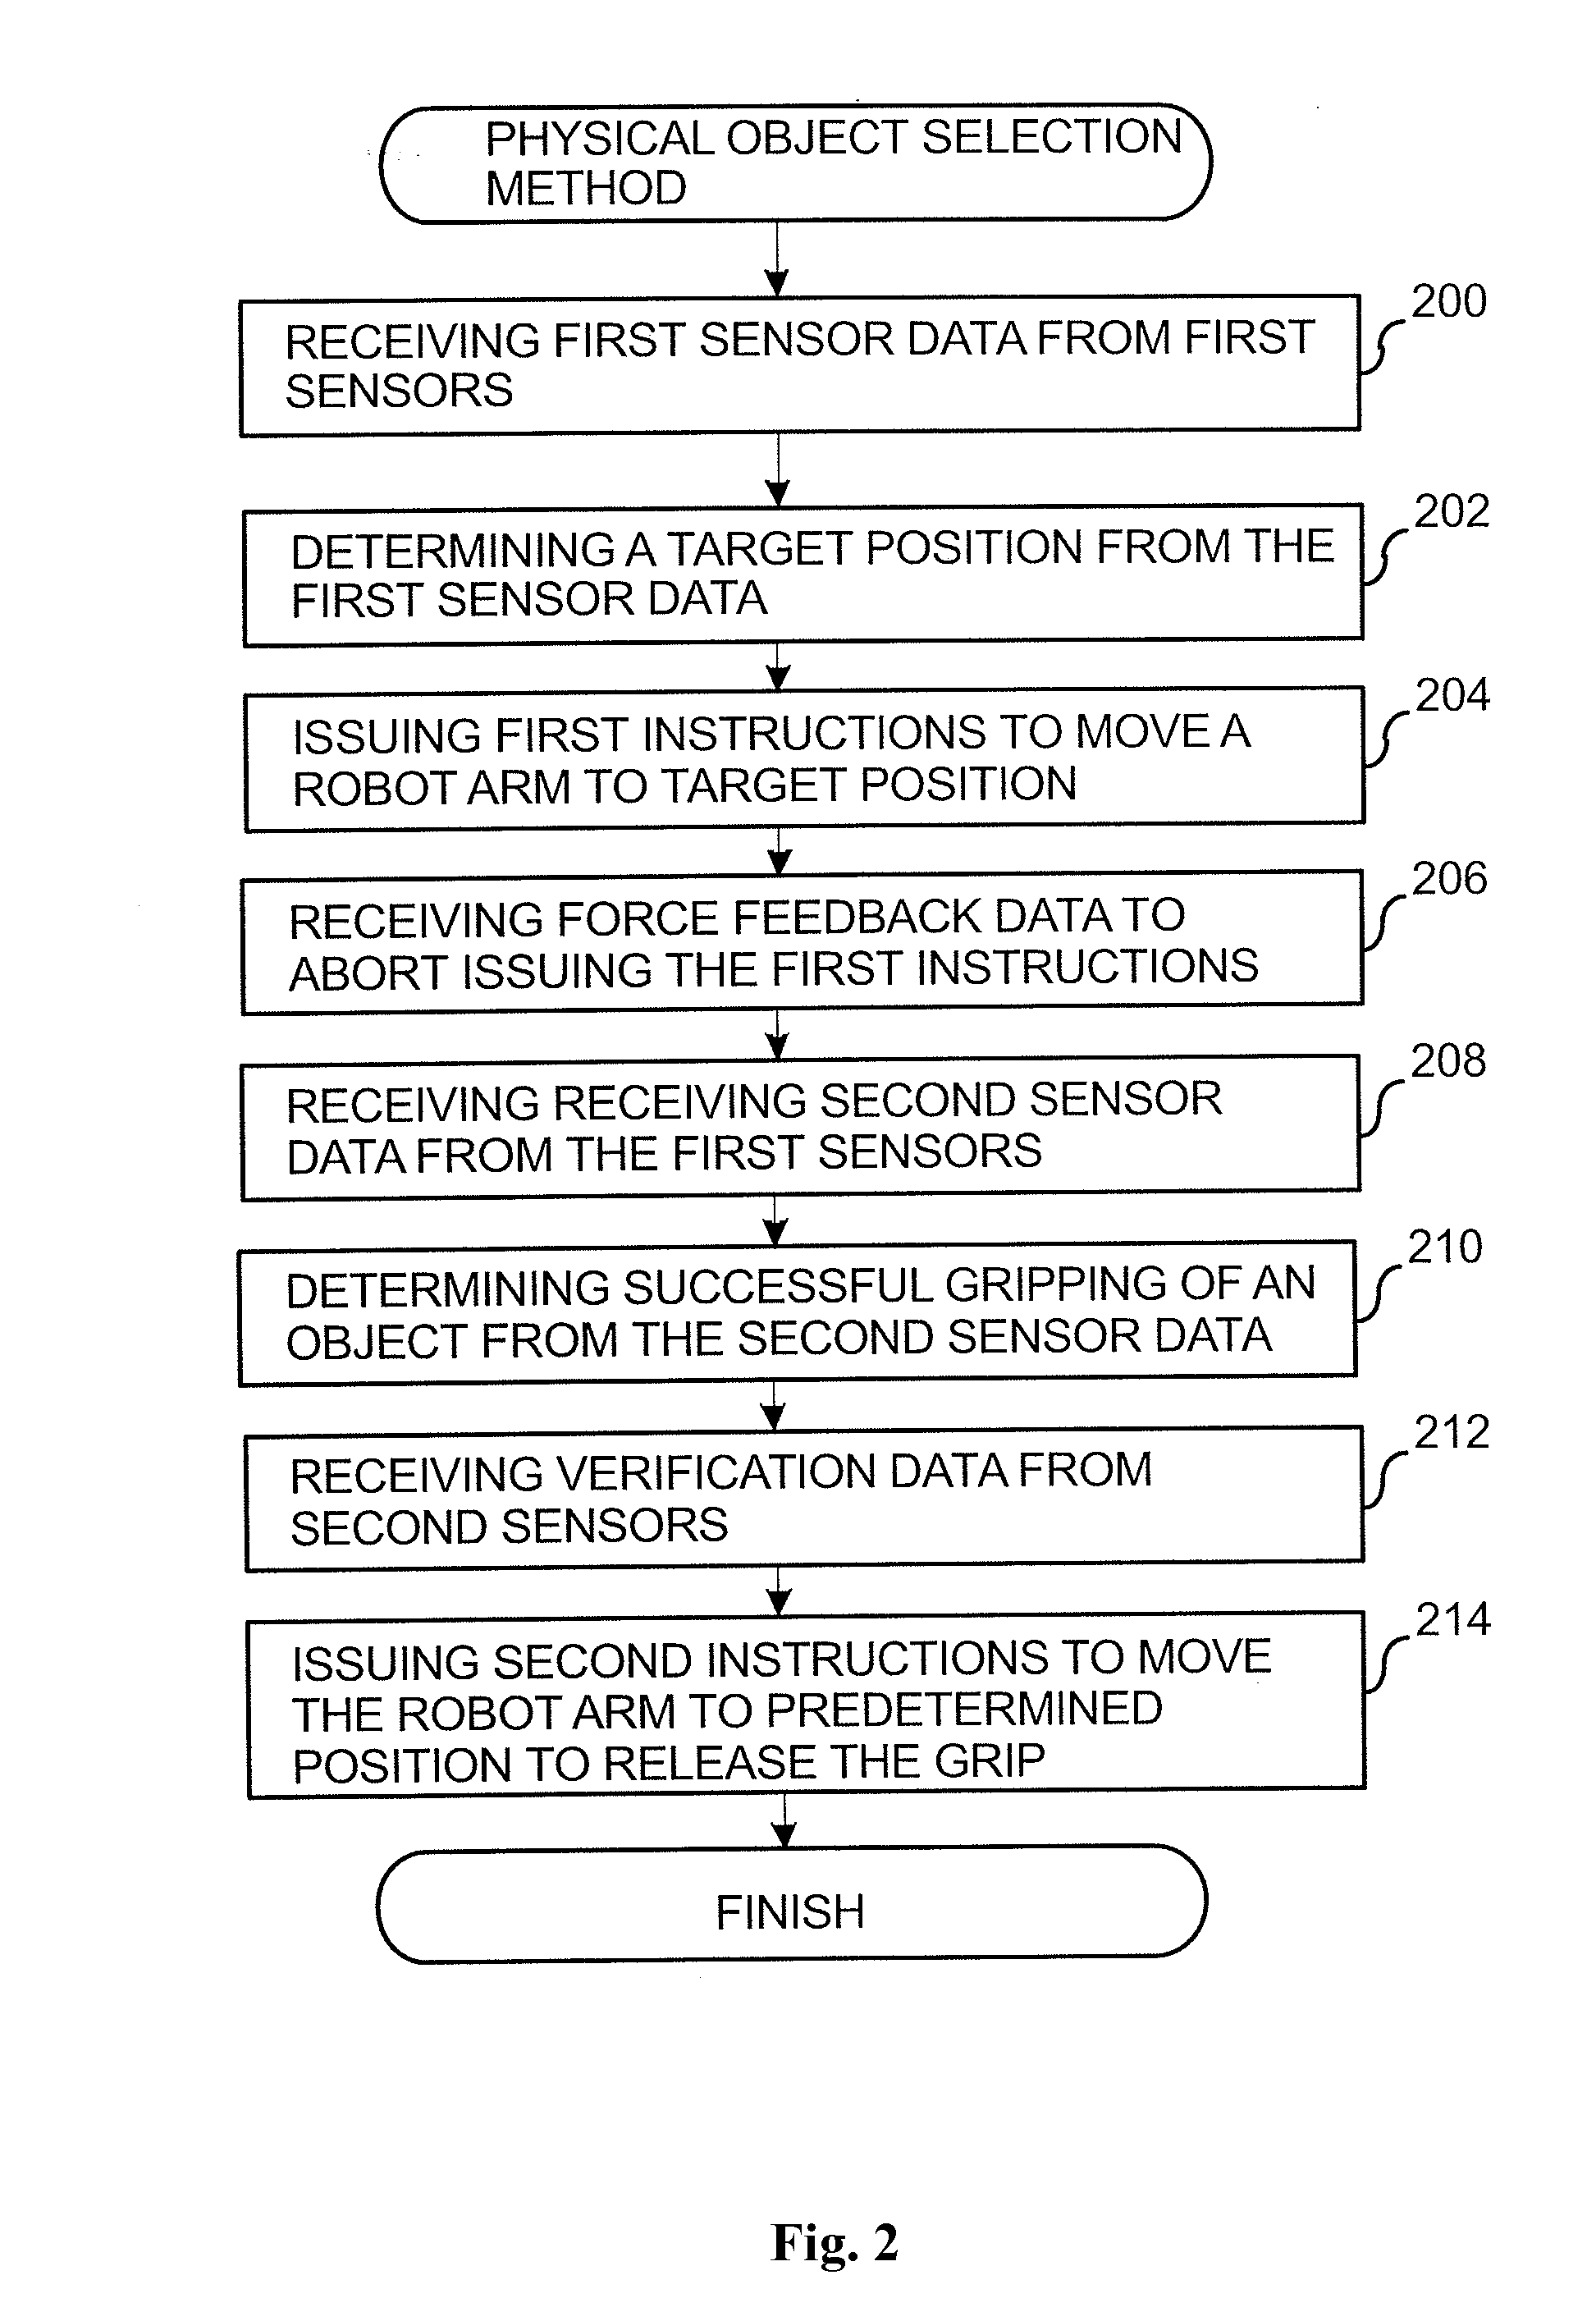 Method for the selection of physical objects in a robot system